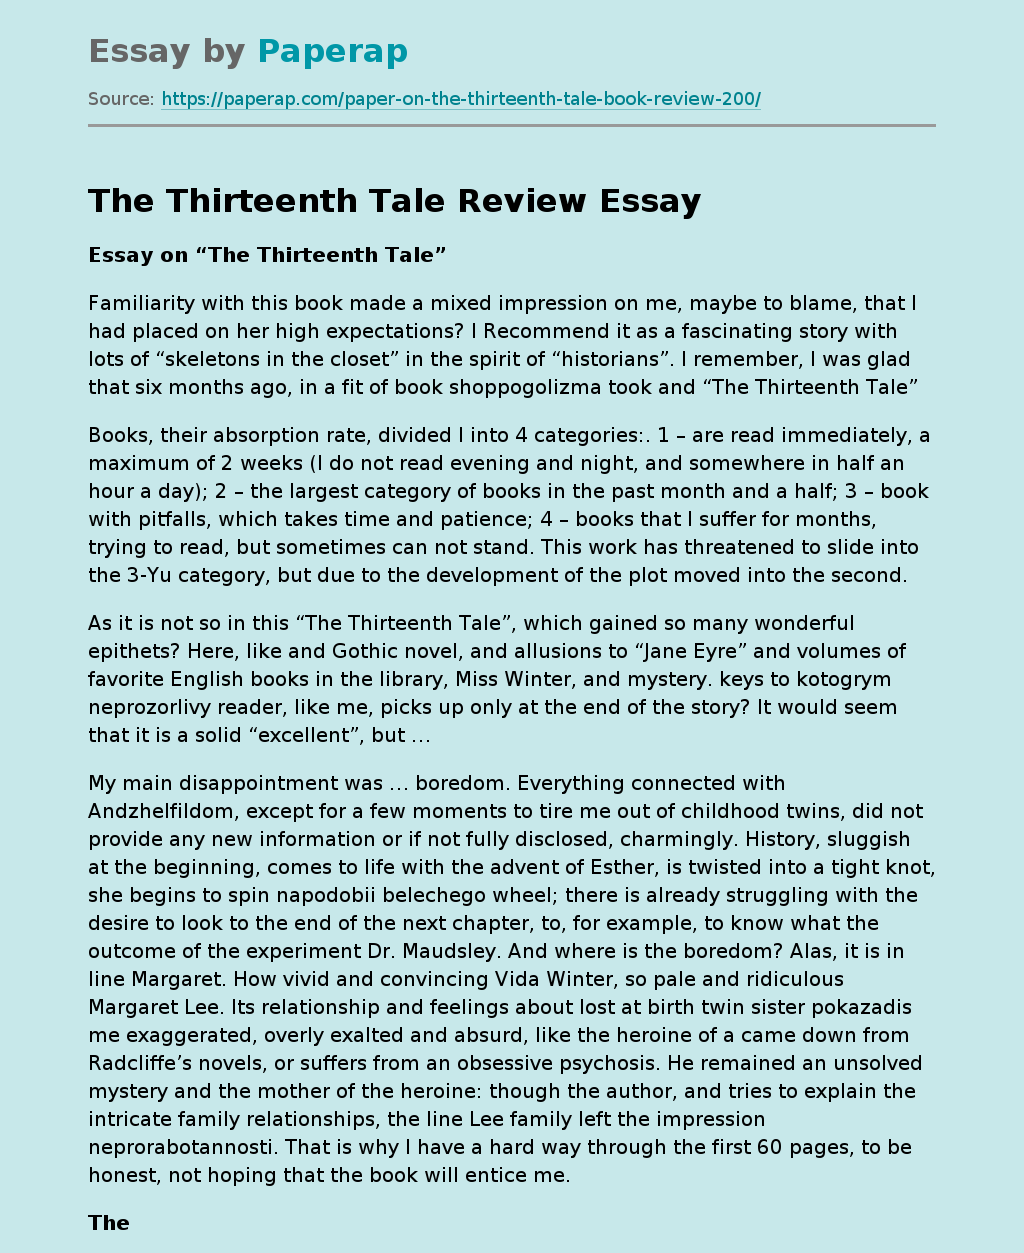 The Thirteenth Tale Review